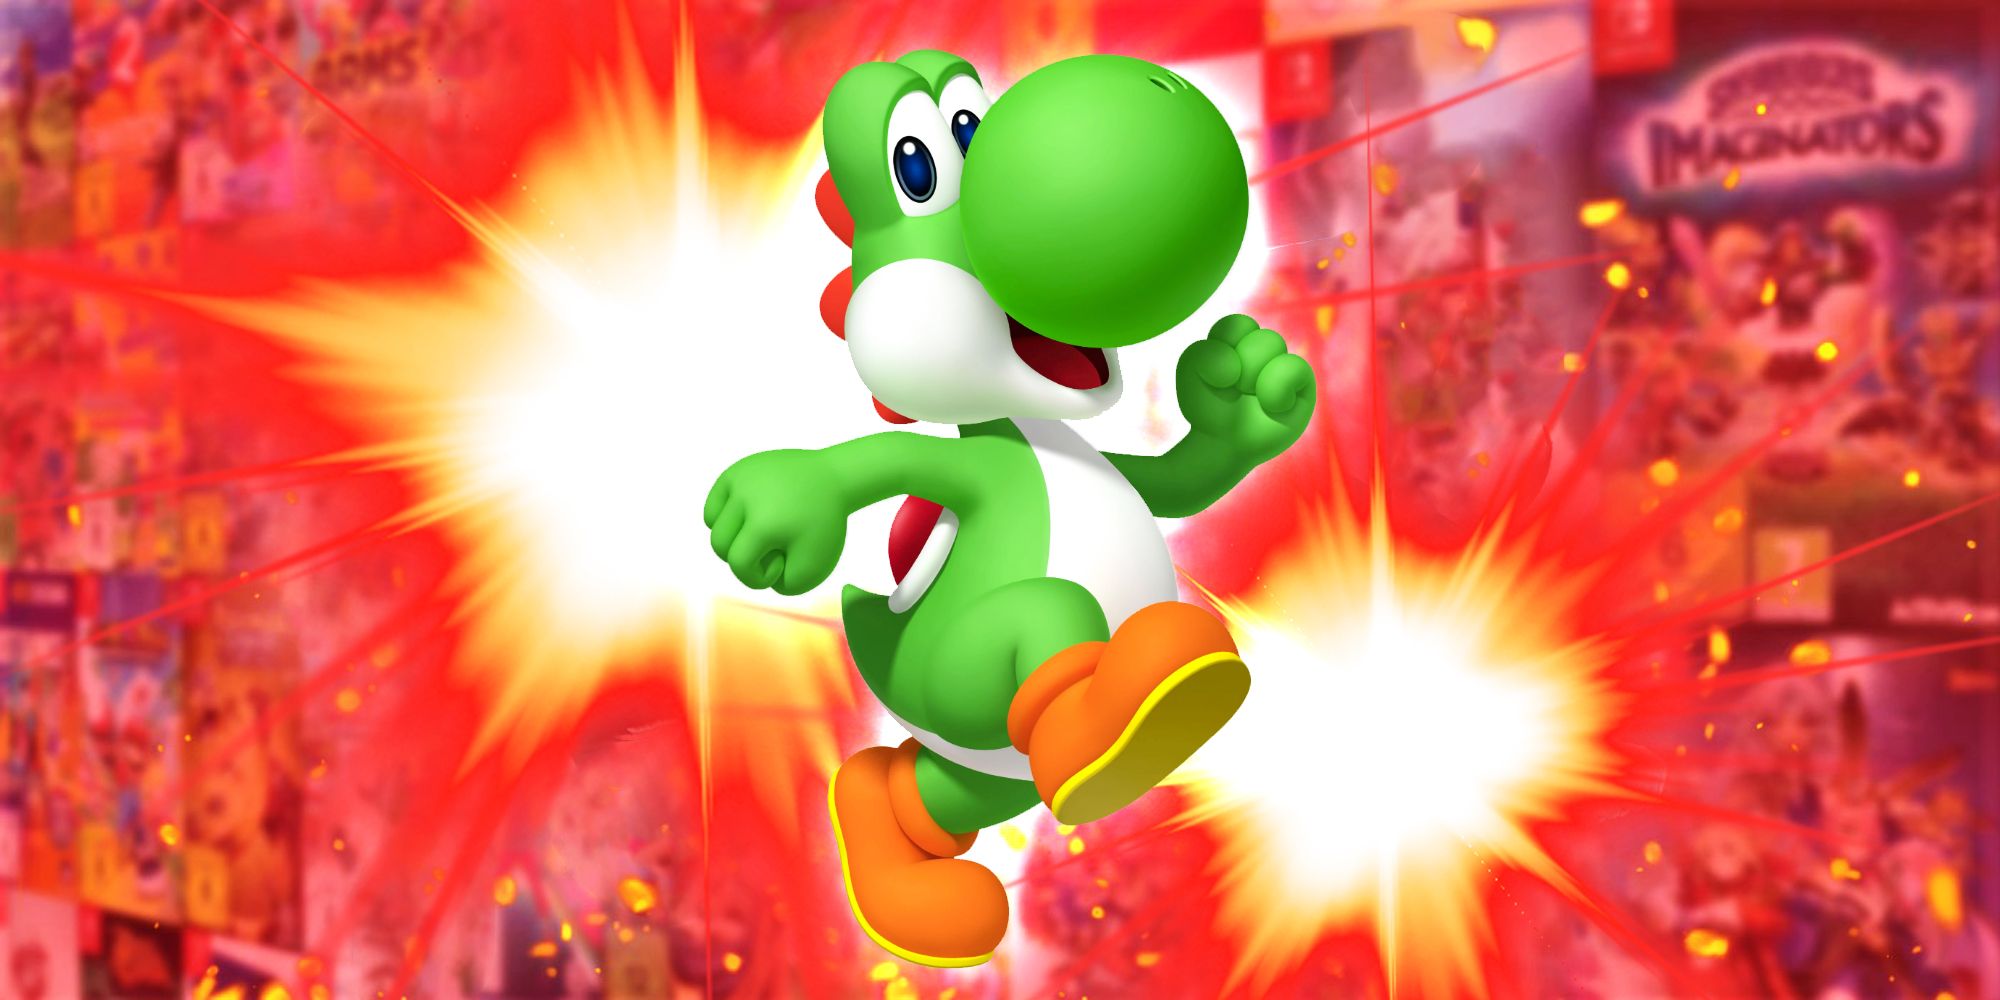 Yoshi from the Nintendo game series on a red, explosive background.